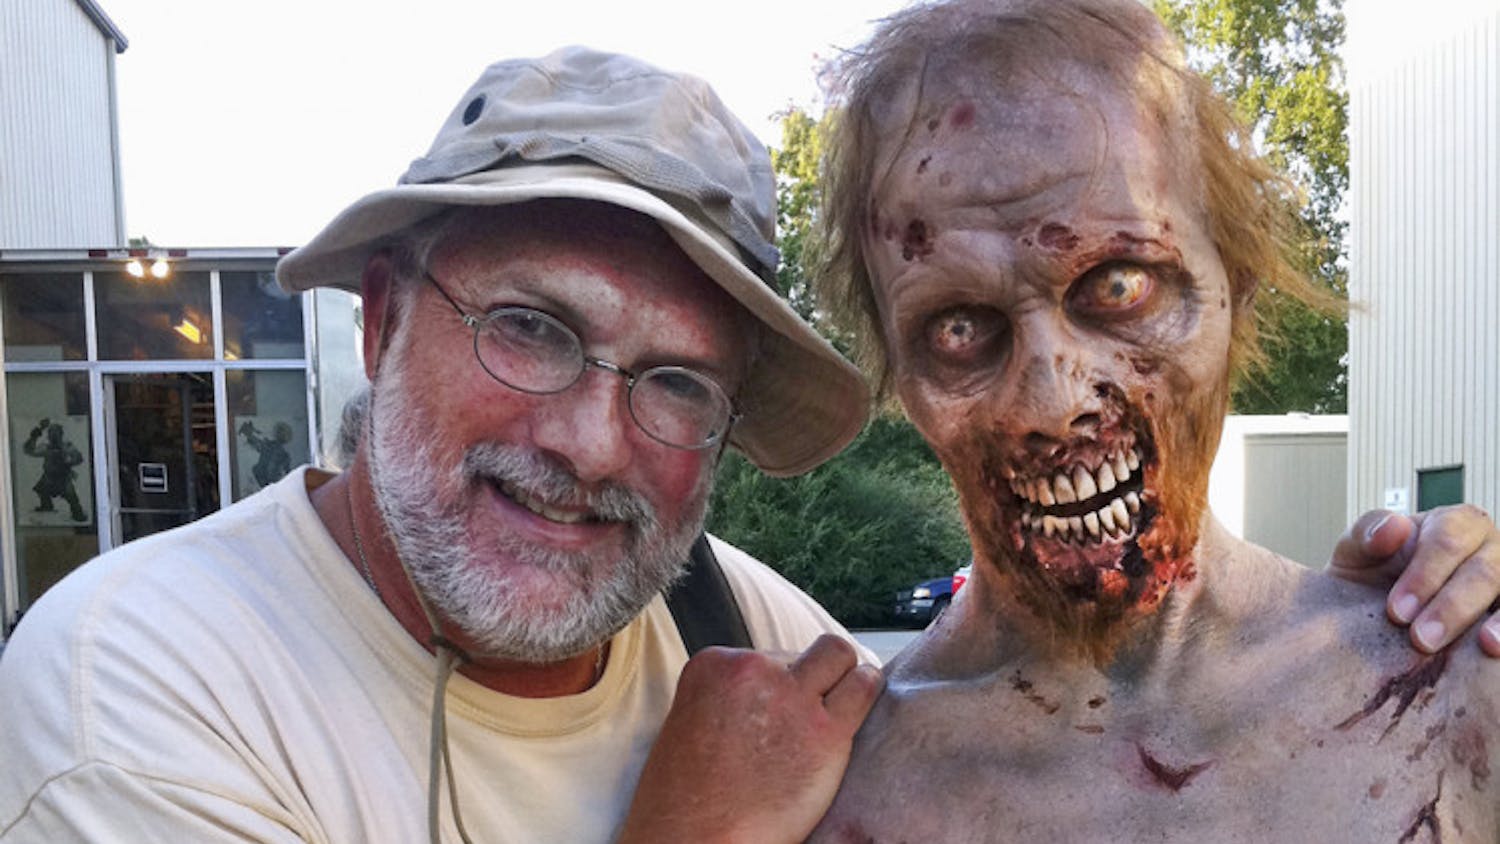 University of Florida alumnus Gene Page, set photographer for "The Walking Dead" poses for a photo with one of the cast's zombies.